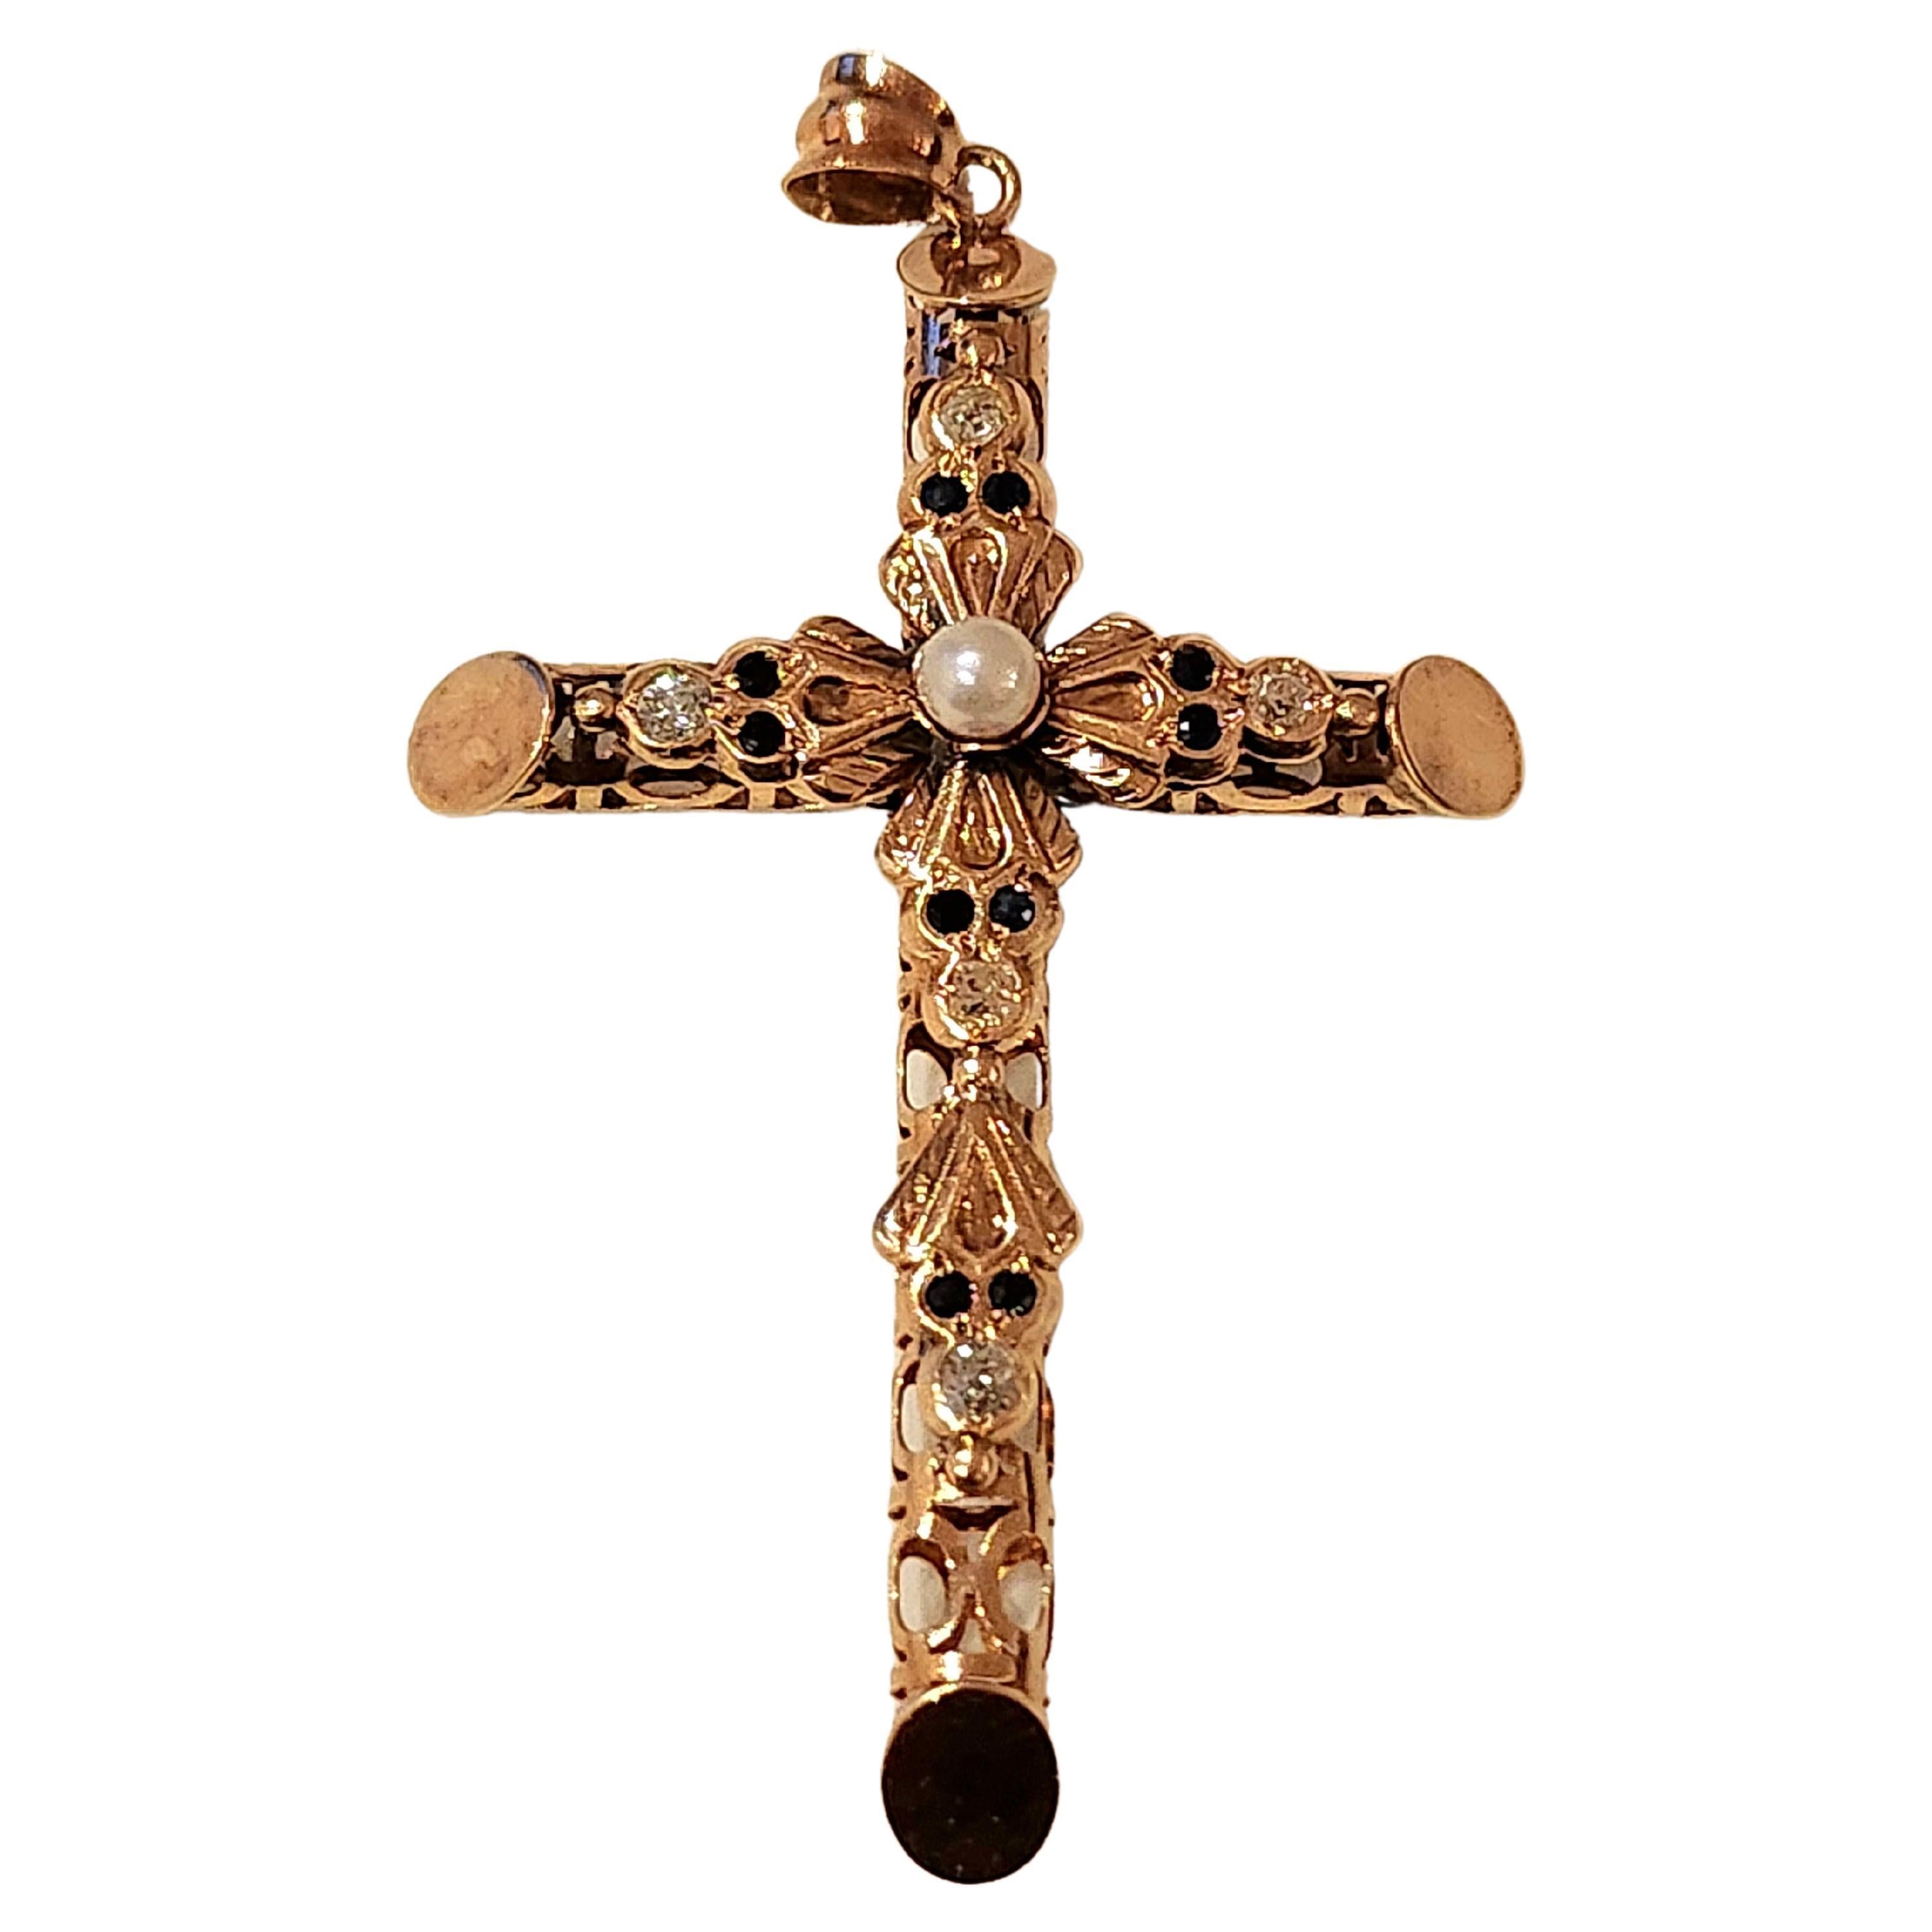 Antique Large cross in open work style centered with 5 old mine cut diaminds and a natural pearl estimate diamond weight of 0.50 carats cross is in open work style and detailed workmanship cross lenght 8cm hall marked 583 for 14k gold and initial